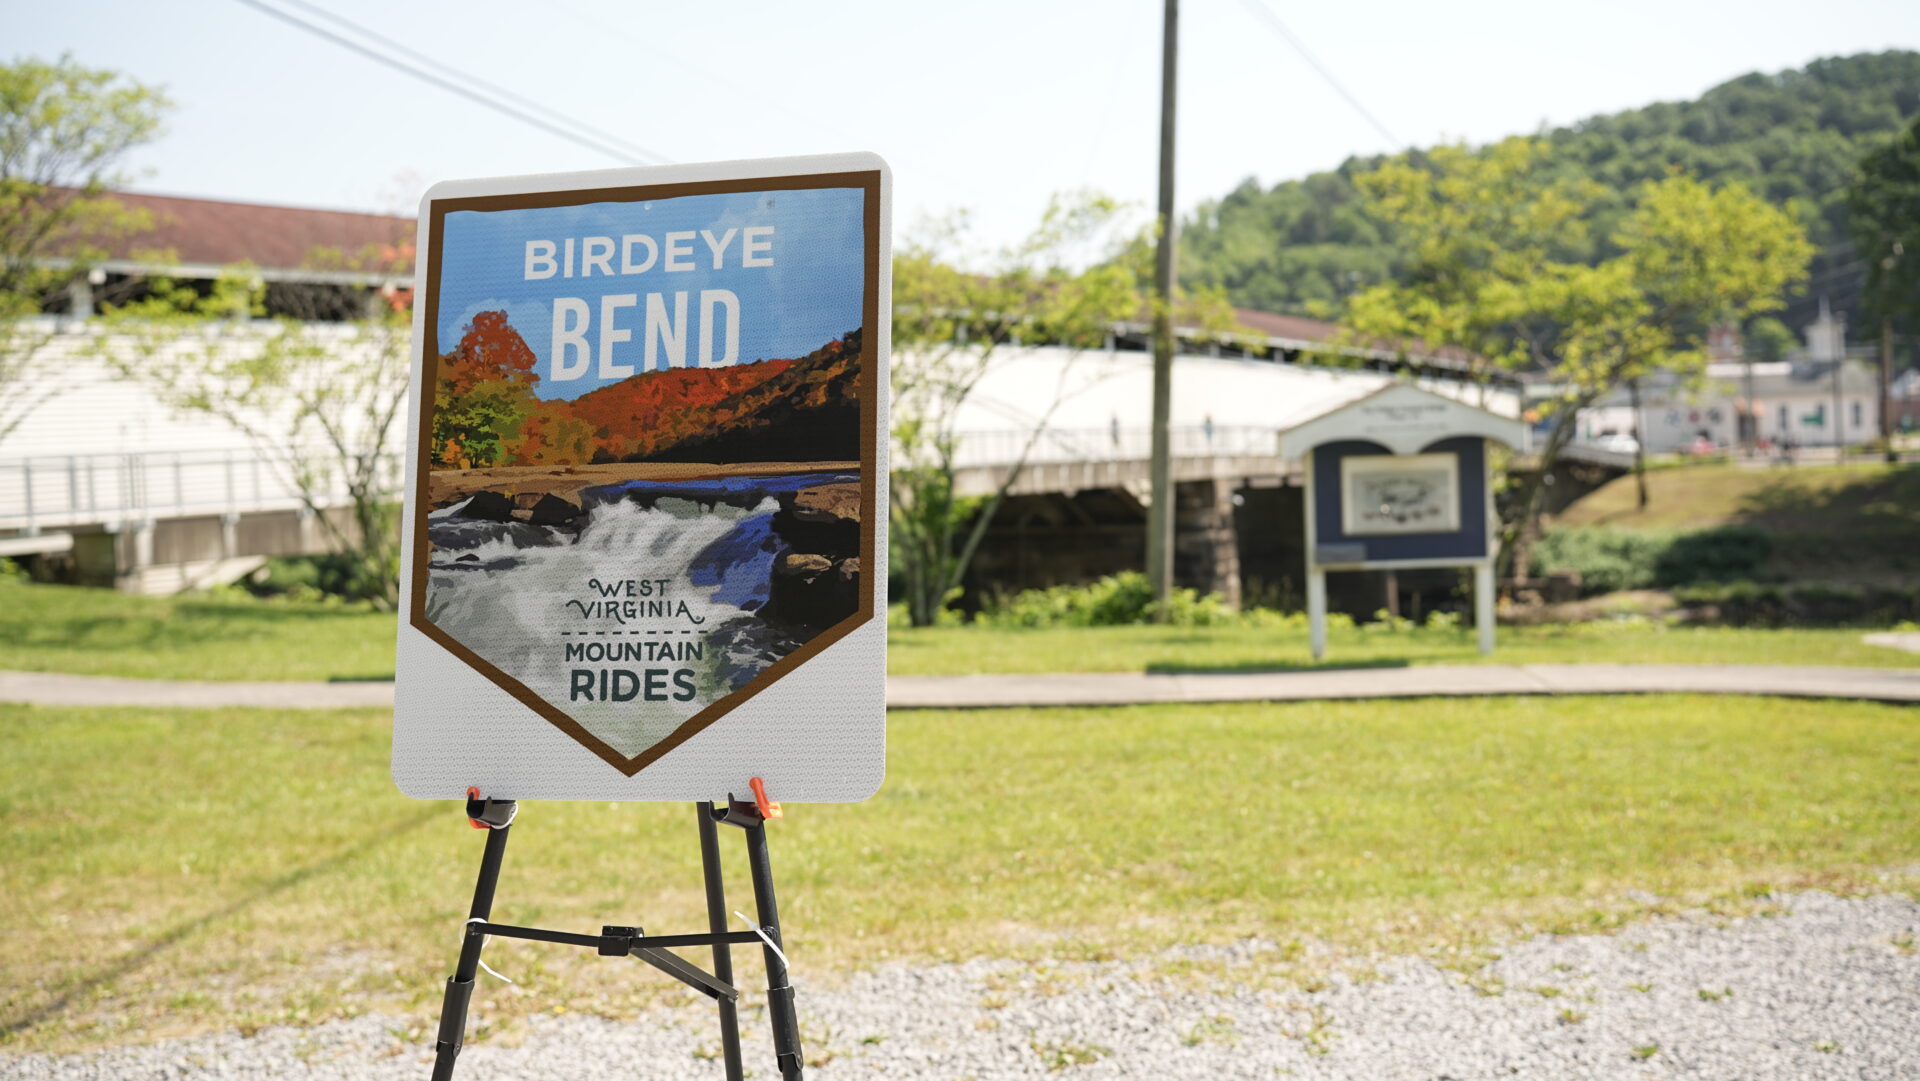 ‘Birdeye Bend’ Section Of W.Va. Mountain Rides Tourism Project Dedicated